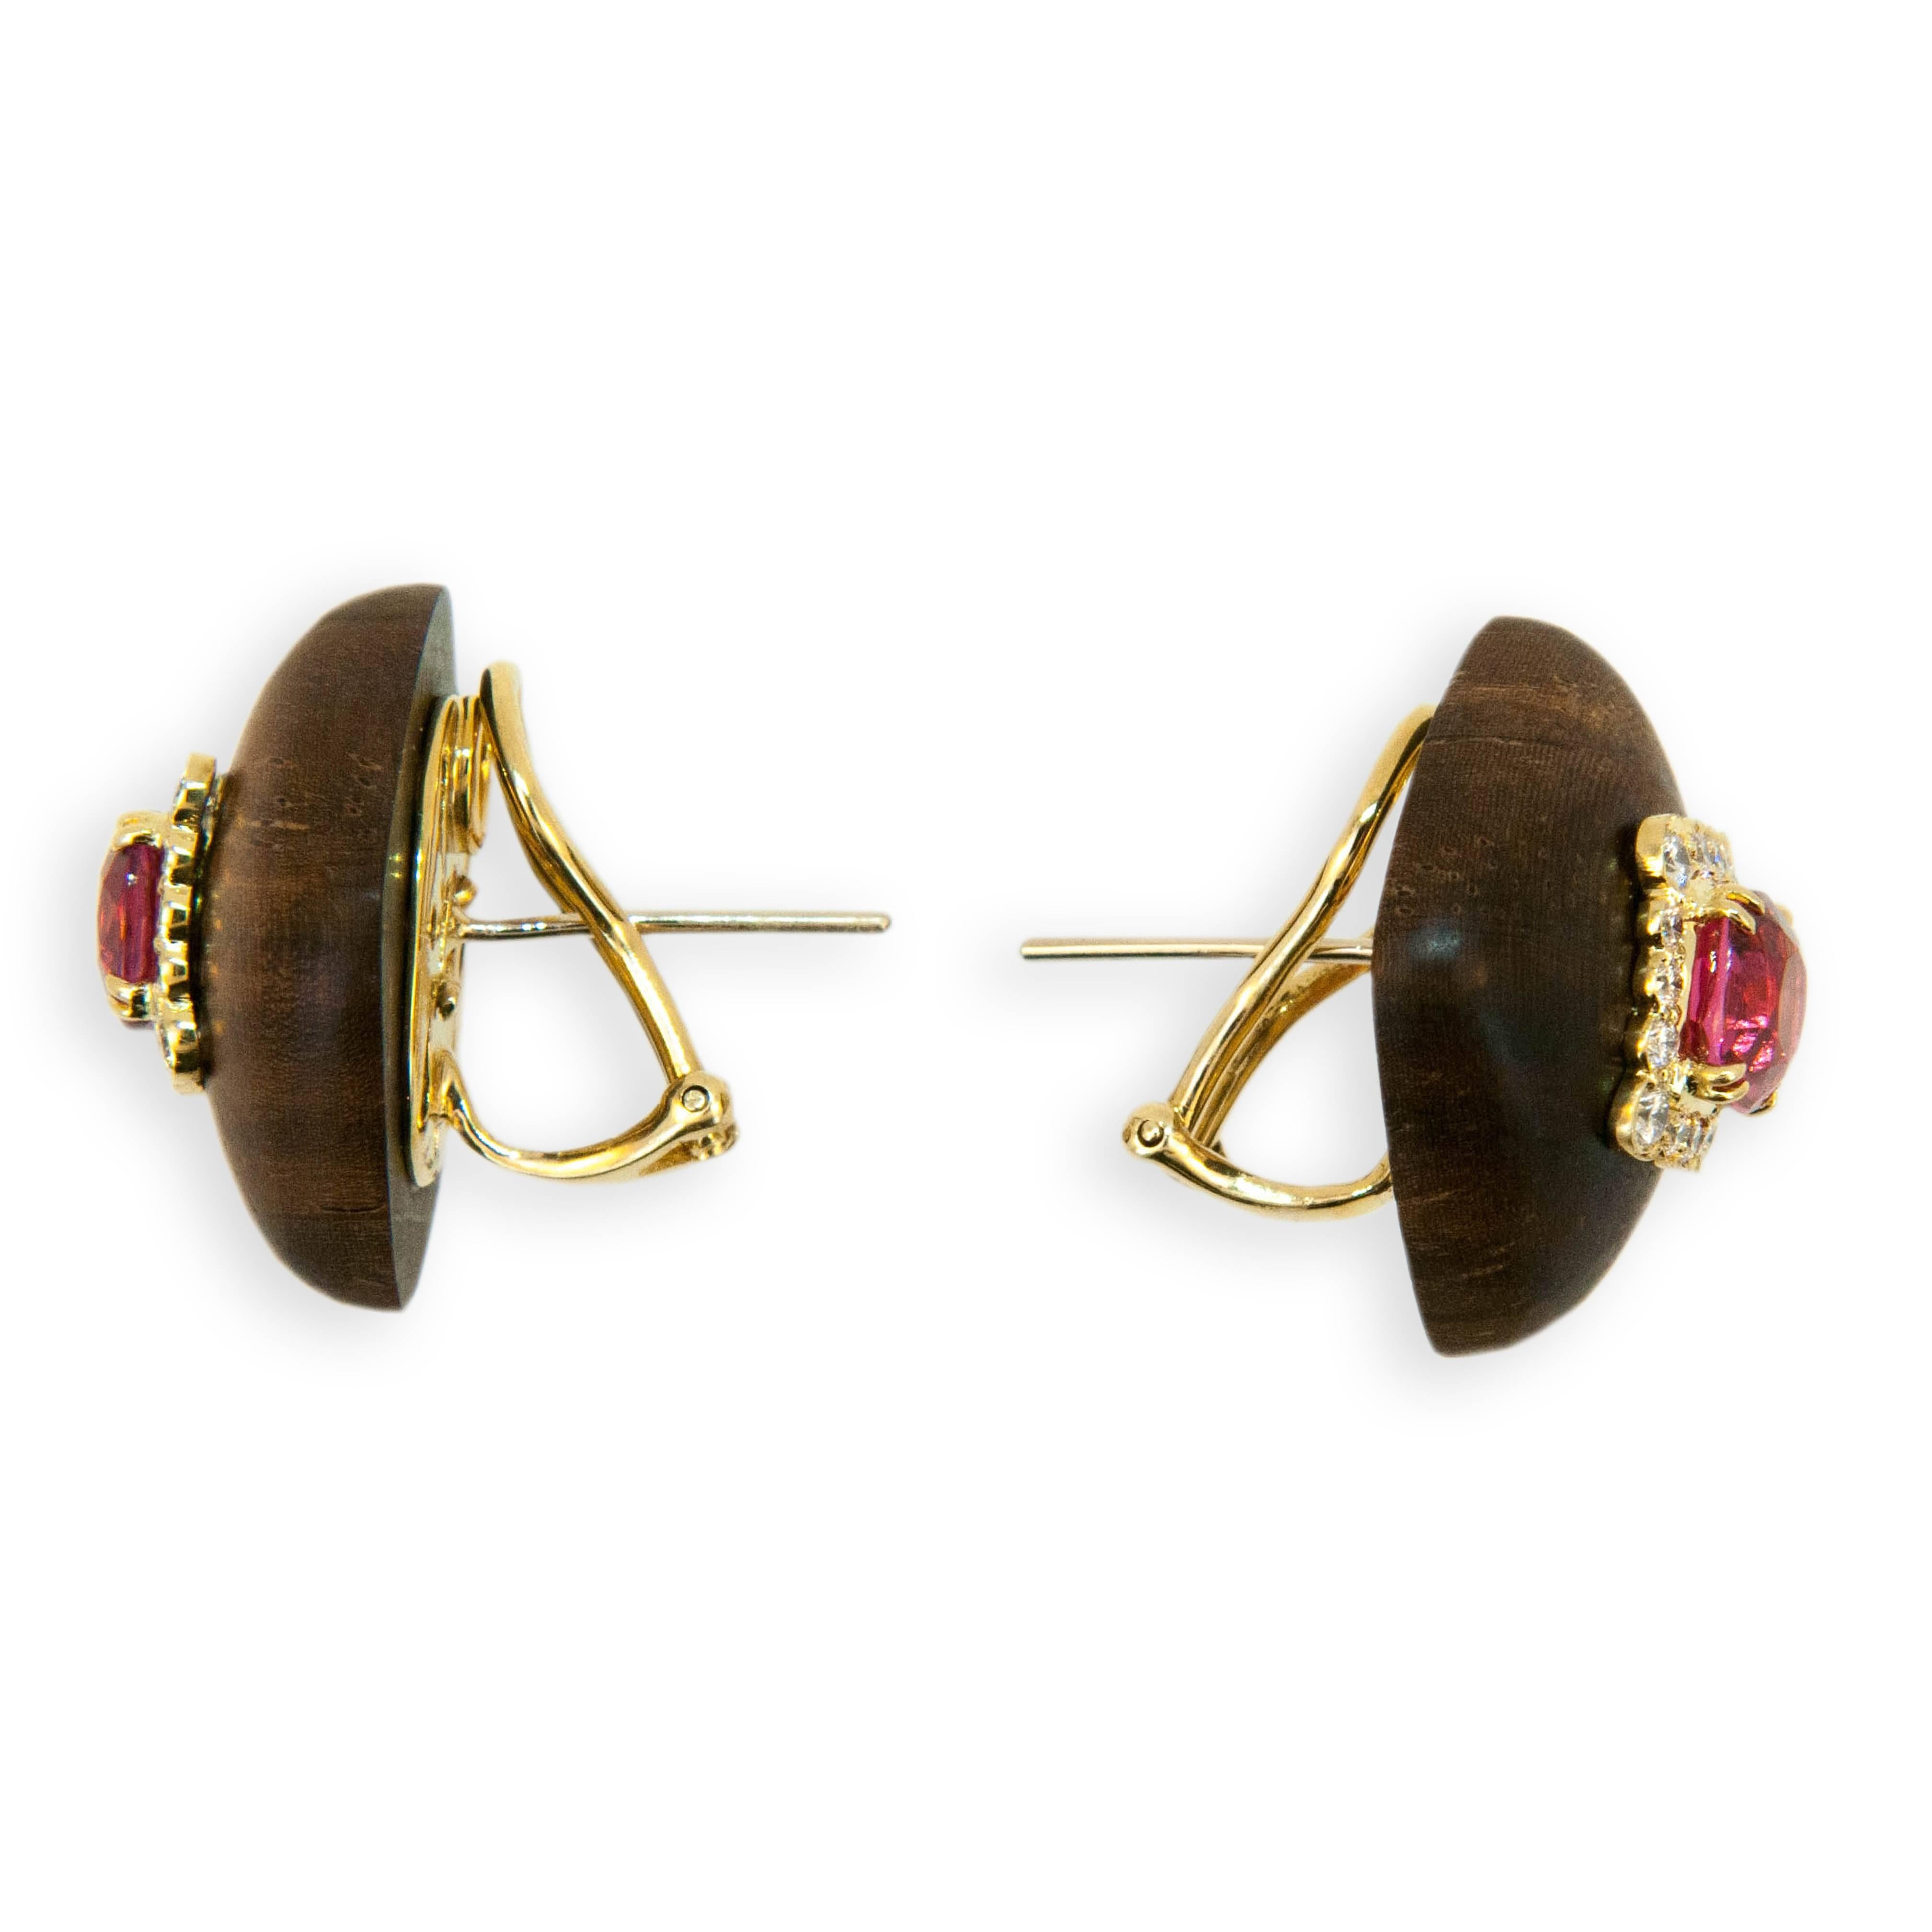 18 karat yellow gold earrings dark wood each set with one Pink Spinel cushion shaped oval (2) Spinel 3.33 carats total weight. Square frame each set with (16) Diamonds (32) Diamonds total .68 carat total weight. Posts and Clips.   